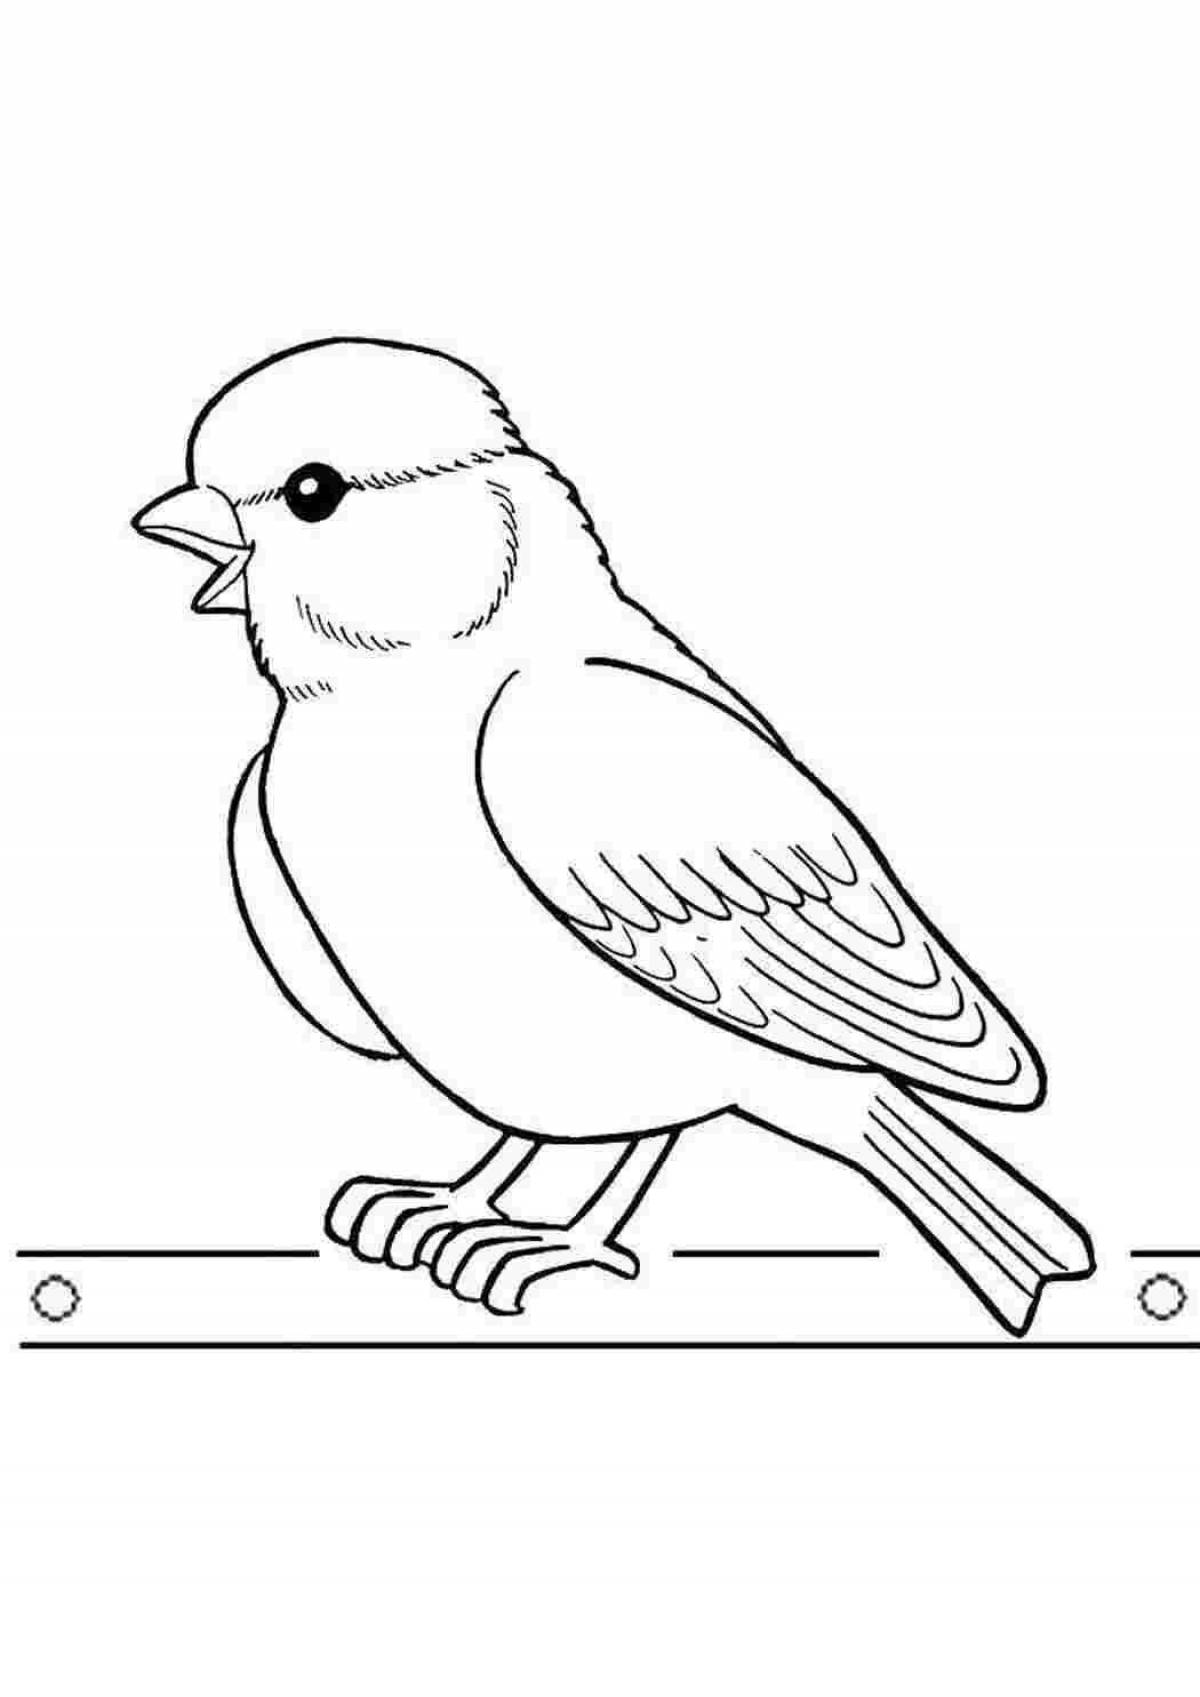 Titmouse coloring page for children 2-3 years old